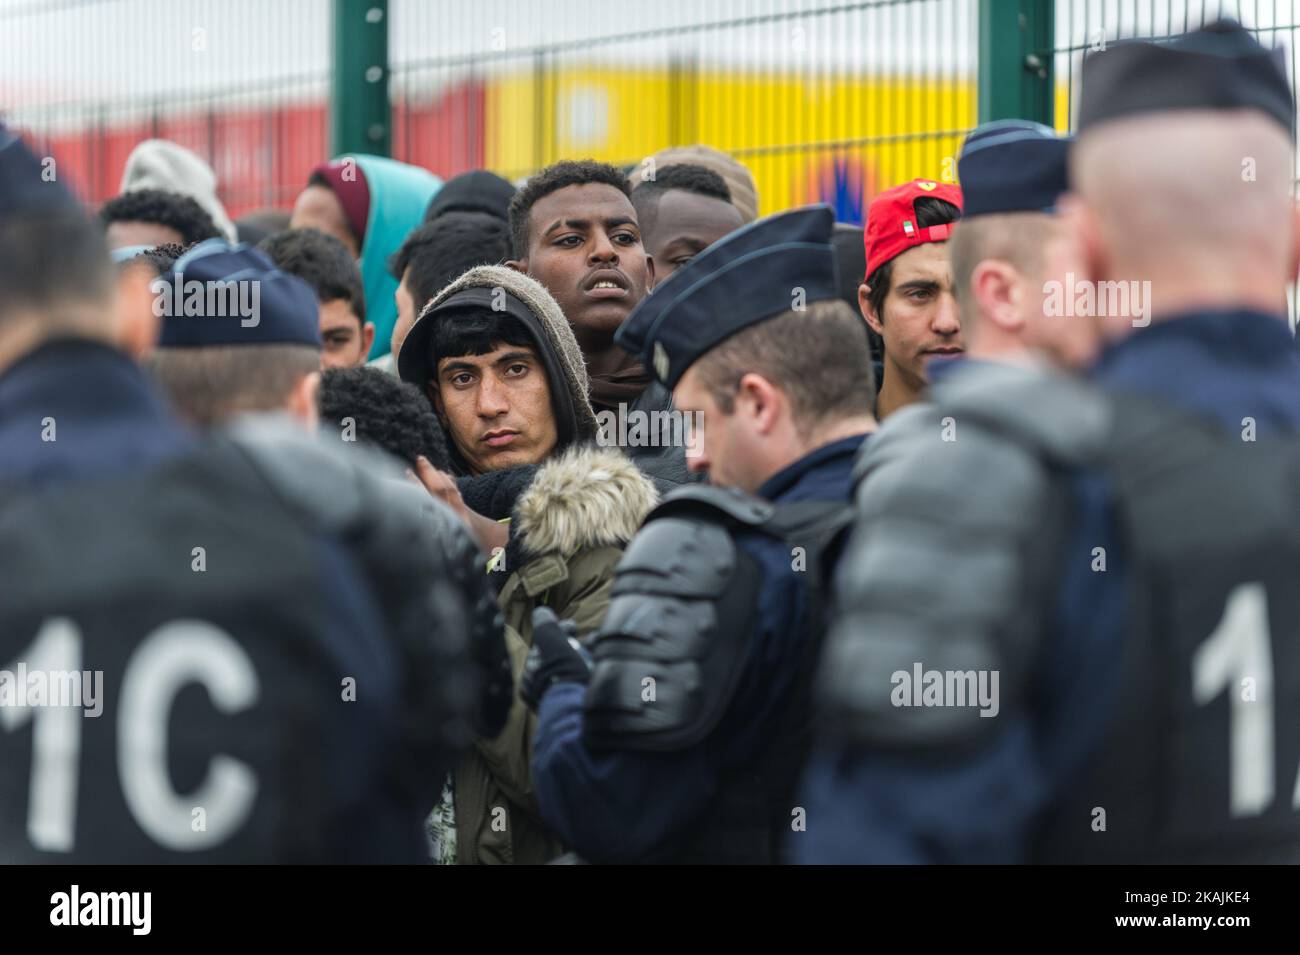 Migrants stand in a line to register themselves in near the Calais Jungle, on October 24, 2016. After registration, the migrants are distributed on buses. The refugee camp on the coast to the English Channel is to be cleared today. The approximately 8,000 refugees are distributed after the registration by busses to various reception centers in France, on October 24, 2016. (Photo by Markus Heine/NurPhoto) *** Please Use Credit from Credit Field *** Stock Photo